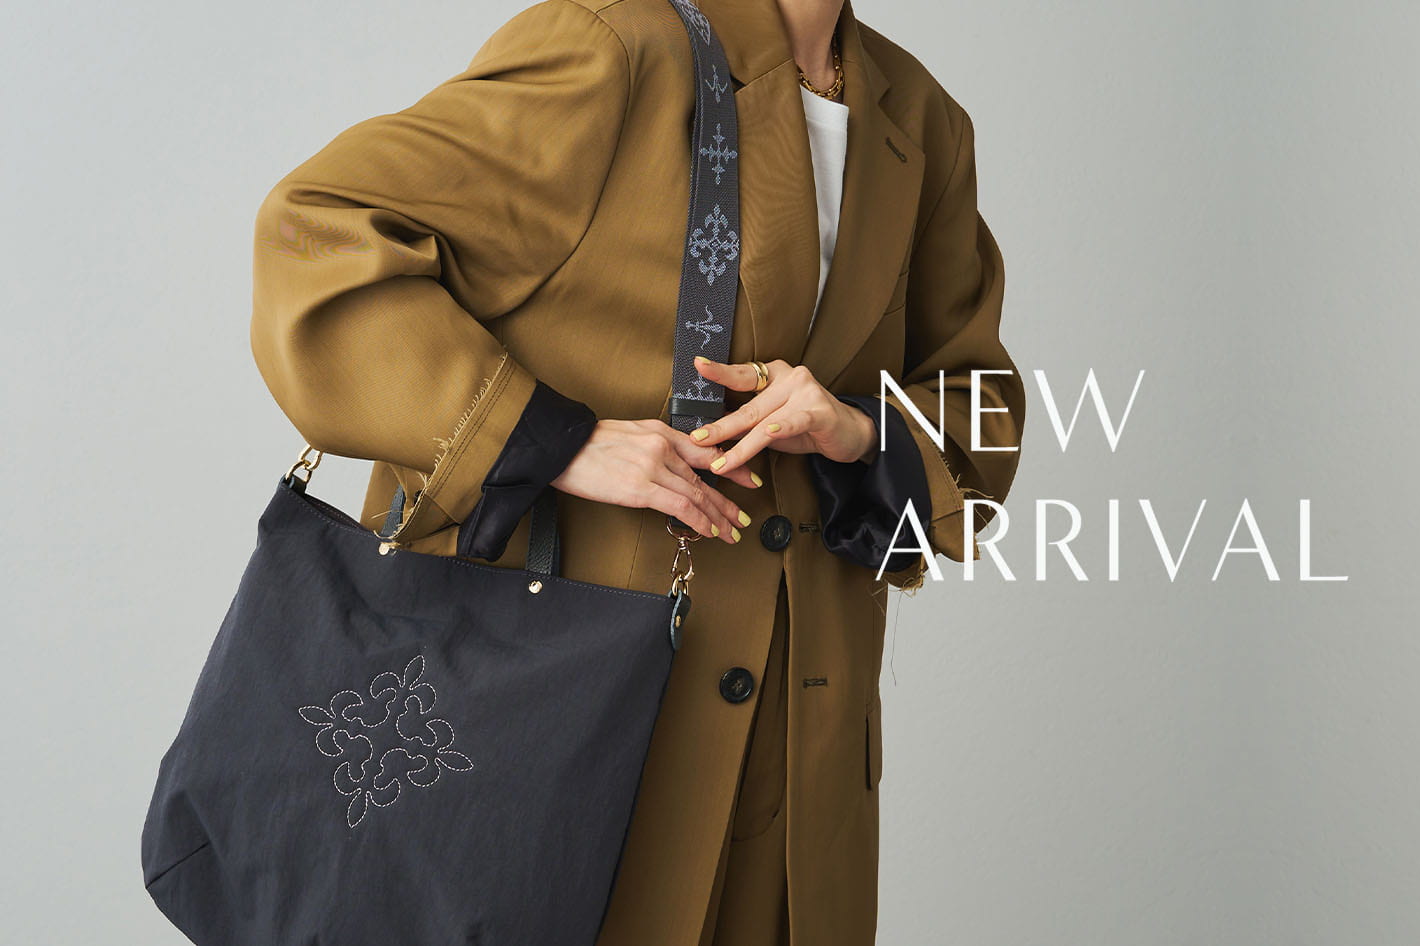 russet ◆NEW ARRIVAL◆モノグラムを新しく楽しむバッグが登場！